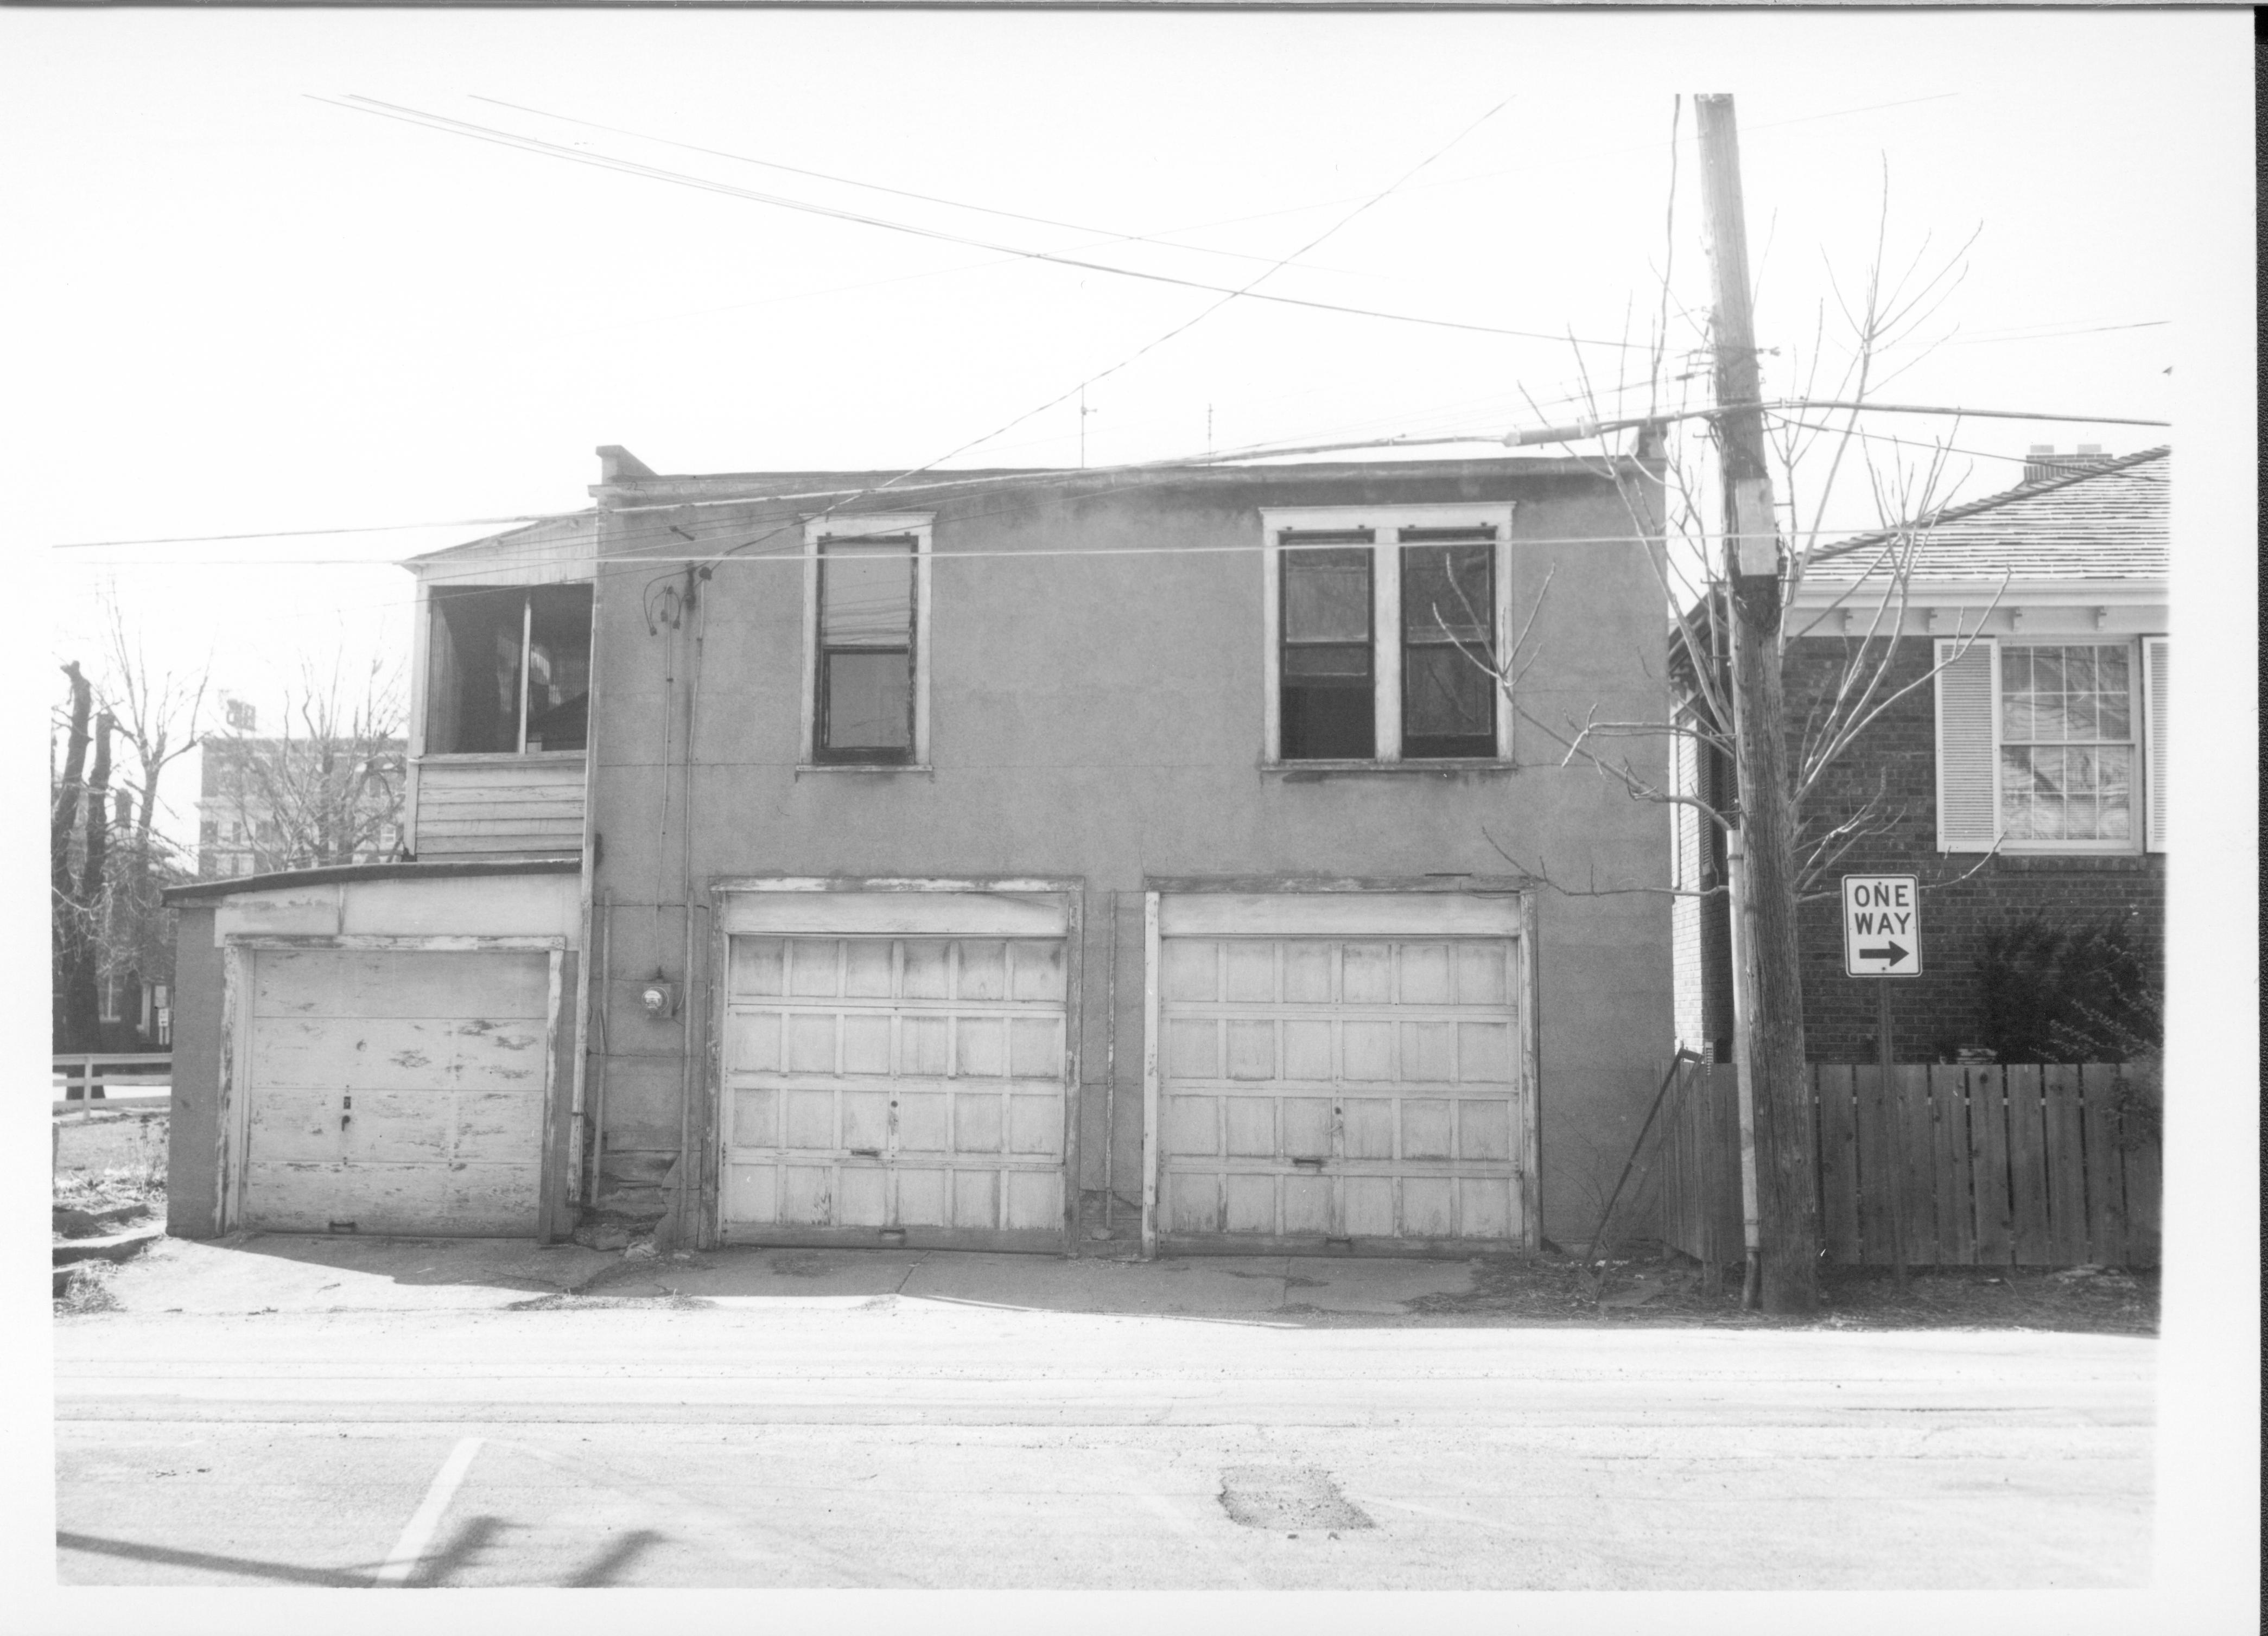 Garage belonging to Eleanor J. Pruett on Block 7, Lot 7 along 7th Street.  Building on right belonged to Evelyn Grummon and used by Springfield Marine Bank as the Barrister Building.  Located where Visitor Center is now. Looking West along alley Pruett, Grummon, Springfield Marine Bank, Barrister Building, Visitor Center